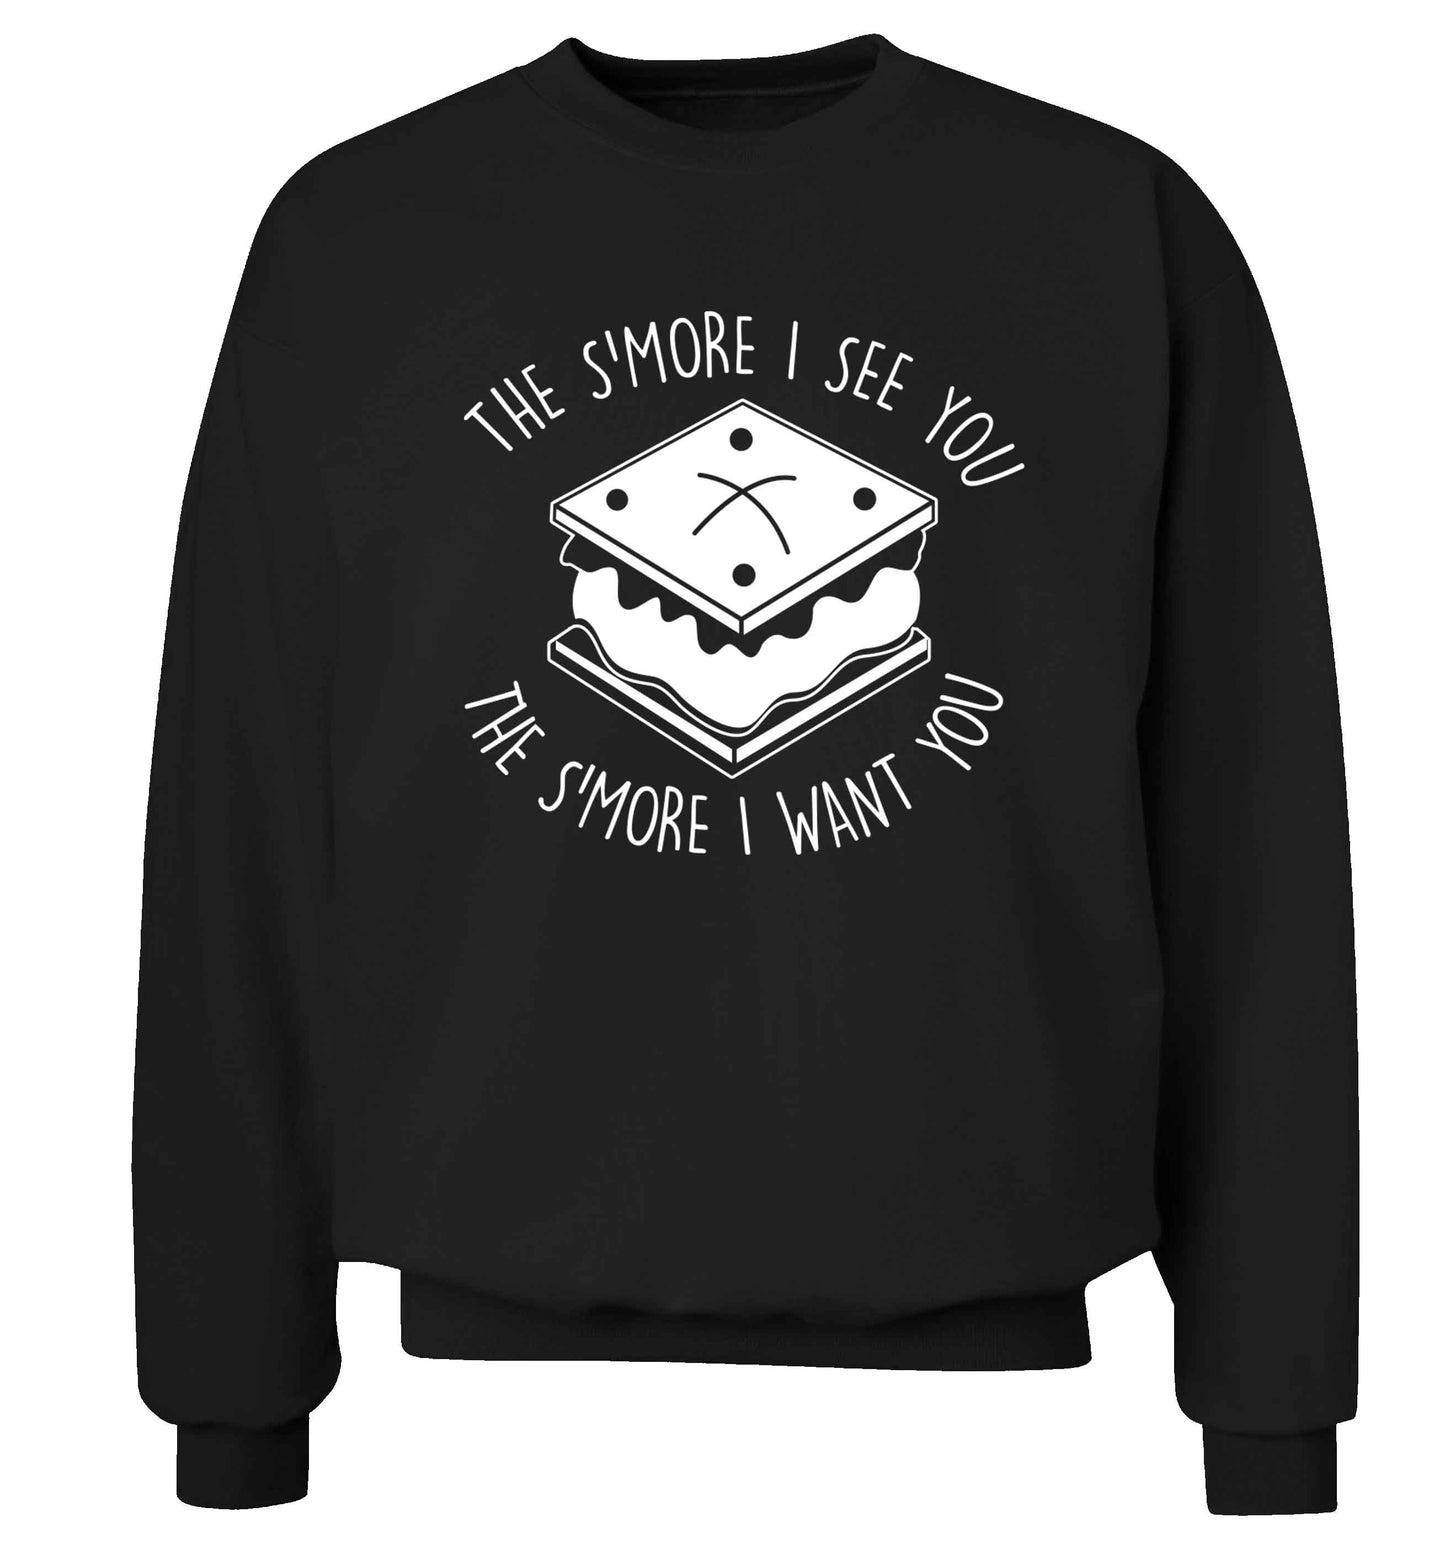 The s'more I see you the s'more I want you Adult's unisex black Sweater 2XL